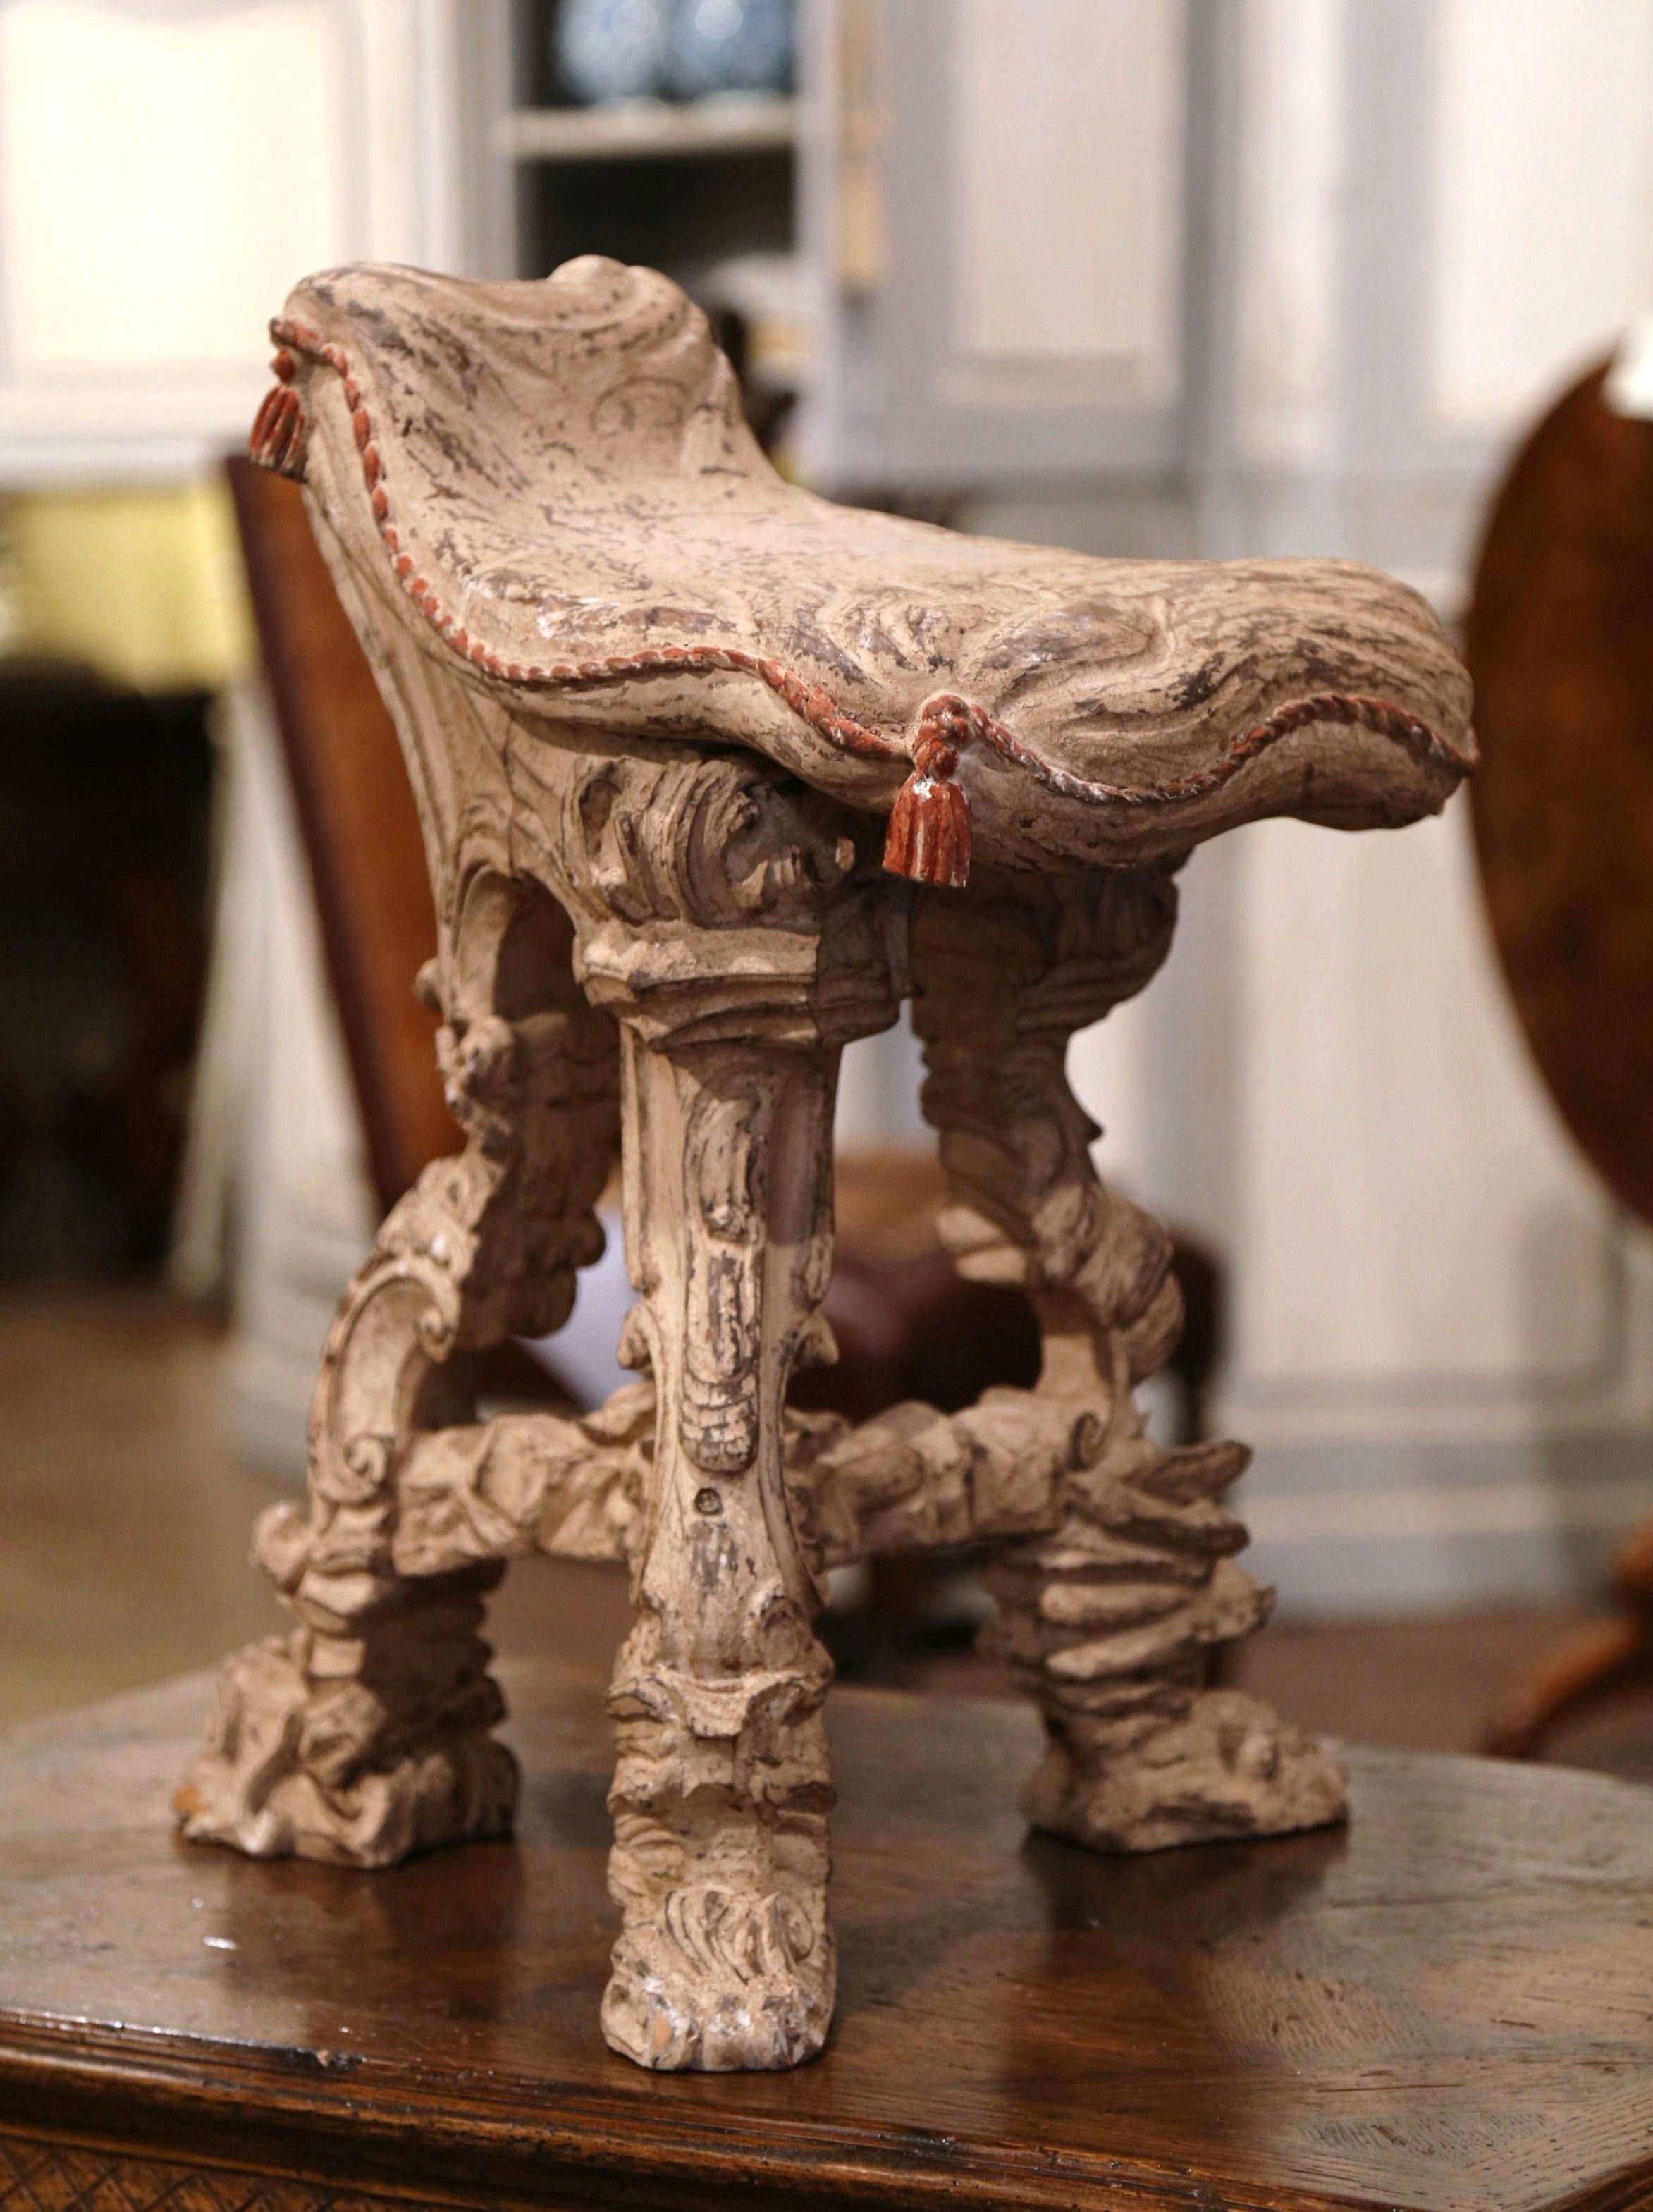 Decorate a master bathroom with this comfortable antique vanity chair; crafted in France circa 1920, the Rococo stool stands on three scrolled legs decorated with carved acanthus leaf and shell motifs. The cushion shape like seat is embellished with